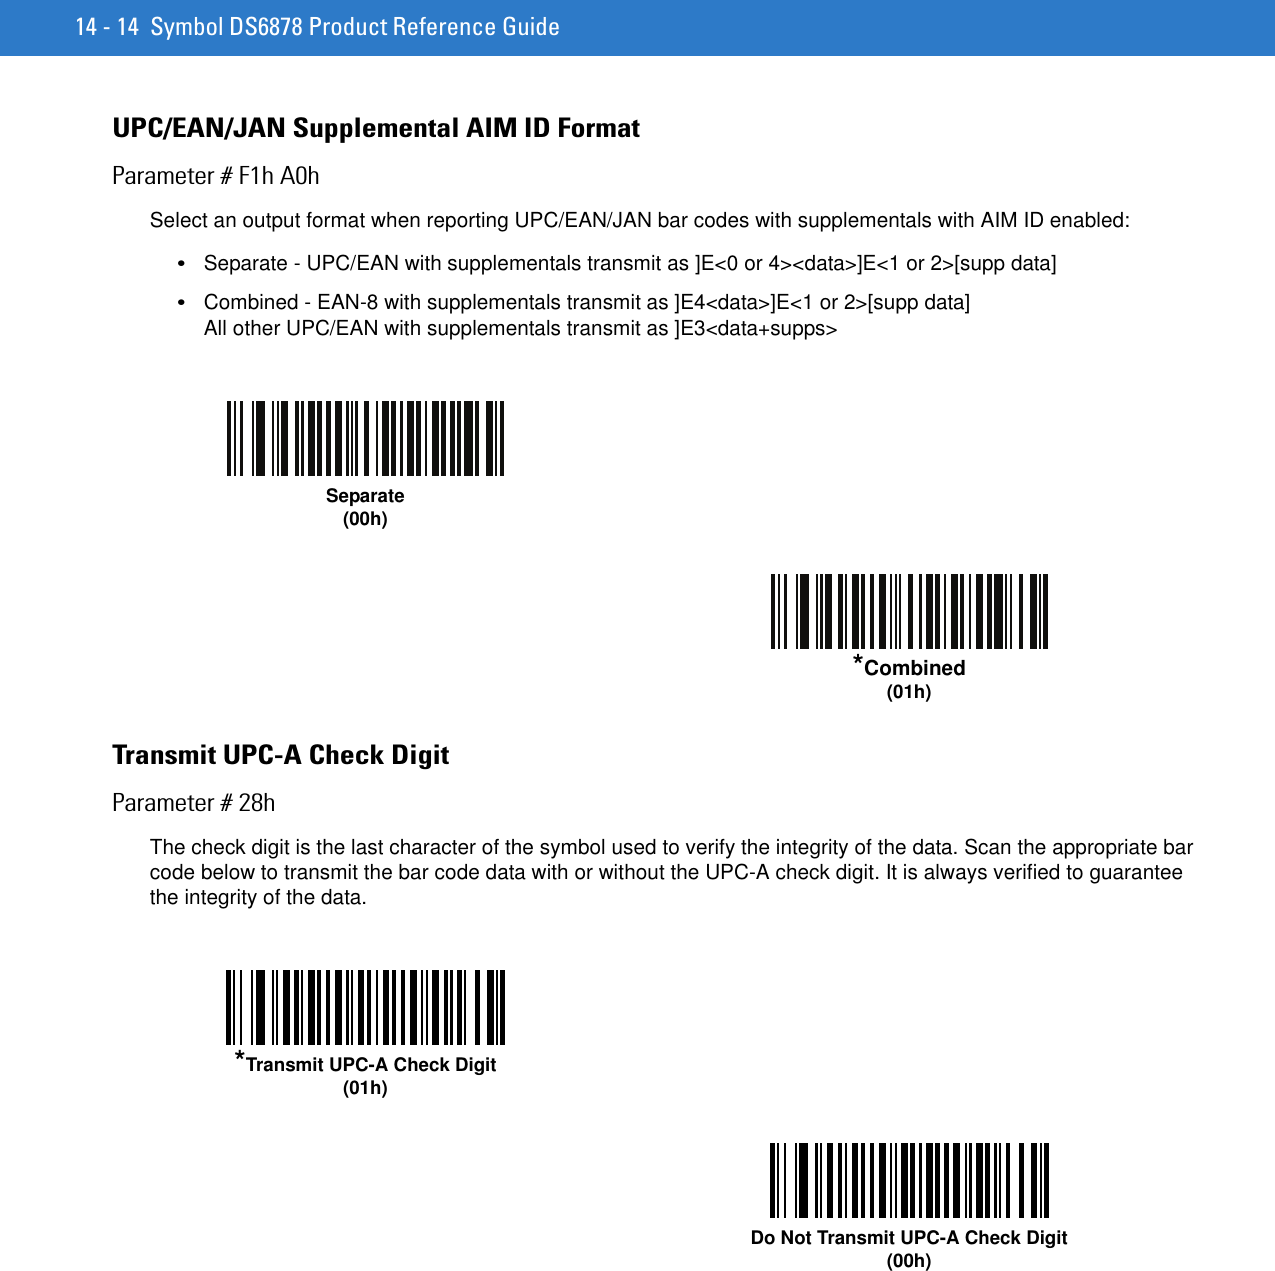 14 - 14 Symbol DS6878 Product Reference GuideUPC/EAN/JAN Supplemental AIM ID FormatParameter # F1h A0hSelect an output format when reporting UPC/EAN/JAN bar codes with supplementals with AIM ID enabled:•Separate - UPC/EAN with supplementals transmit as ]E&lt;0 or 4&gt;&lt;data&gt;]E&lt;1 or 2&gt;[supp data]•Combined - EAN-8 with supplementals transmit as ]E4&lt;data&gt;]E&lt;1 or 2&gt;[supp data]All other UPC/EAN with supplementals transmit as ]E3&lt;data+supps&gt;Transmit UPC-A Check DigitParameter # 28hThe check digit is the last character of the symbol used to verify the integrity of the data. Scan the appropriate bar code below to transmit the bar code data with or without the UPC-A check digit. It is always verified to guarantee the integrity of the data. Separate(00h)*Combined(01h)*Transmit UPC-A Check Digit(01h)Do Not Transmit UPC-A Check Digit(00h)